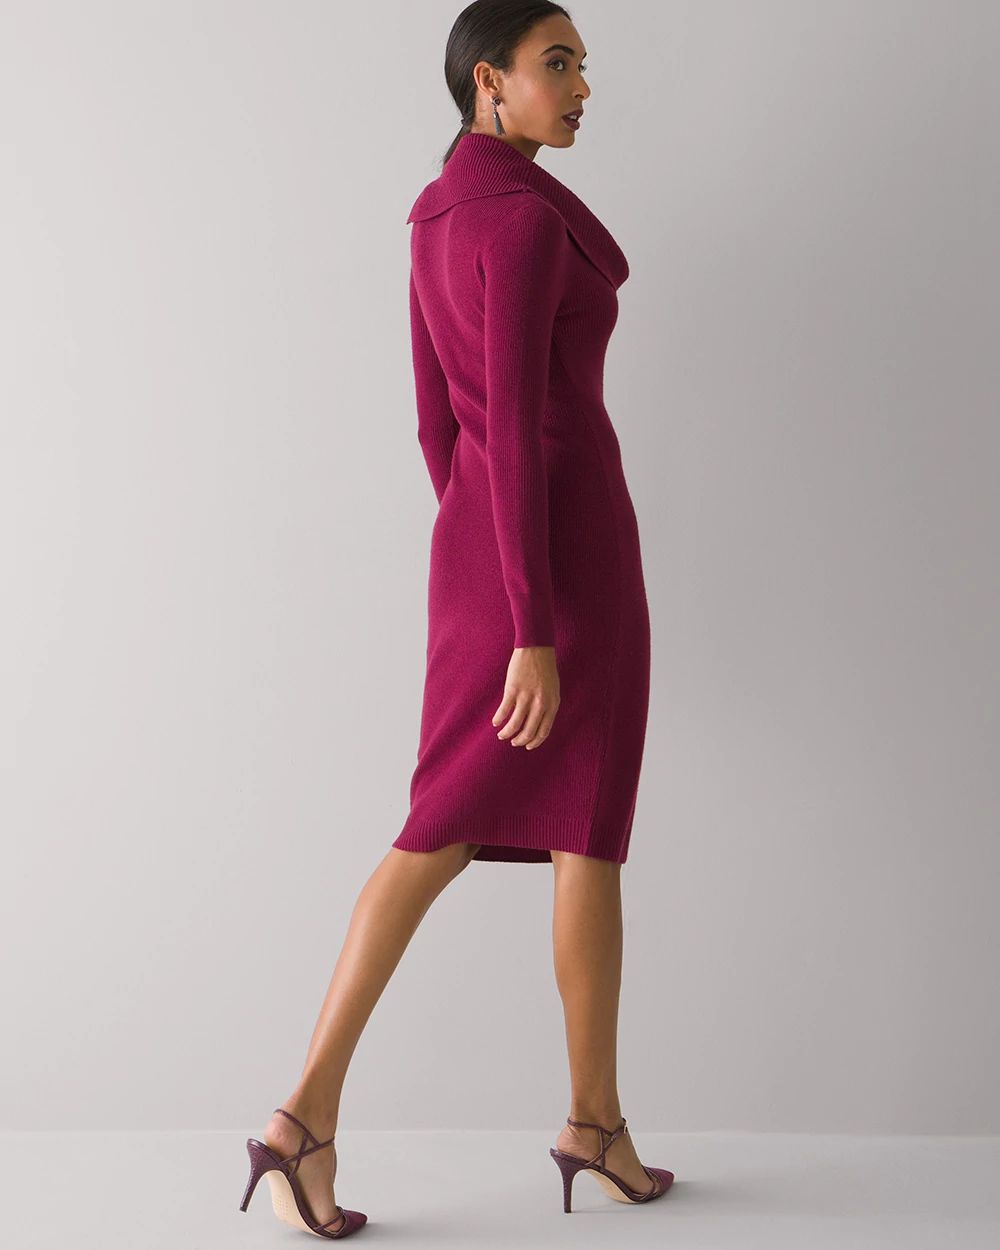 Cowl Neck Sweater Dress click to view larger image.